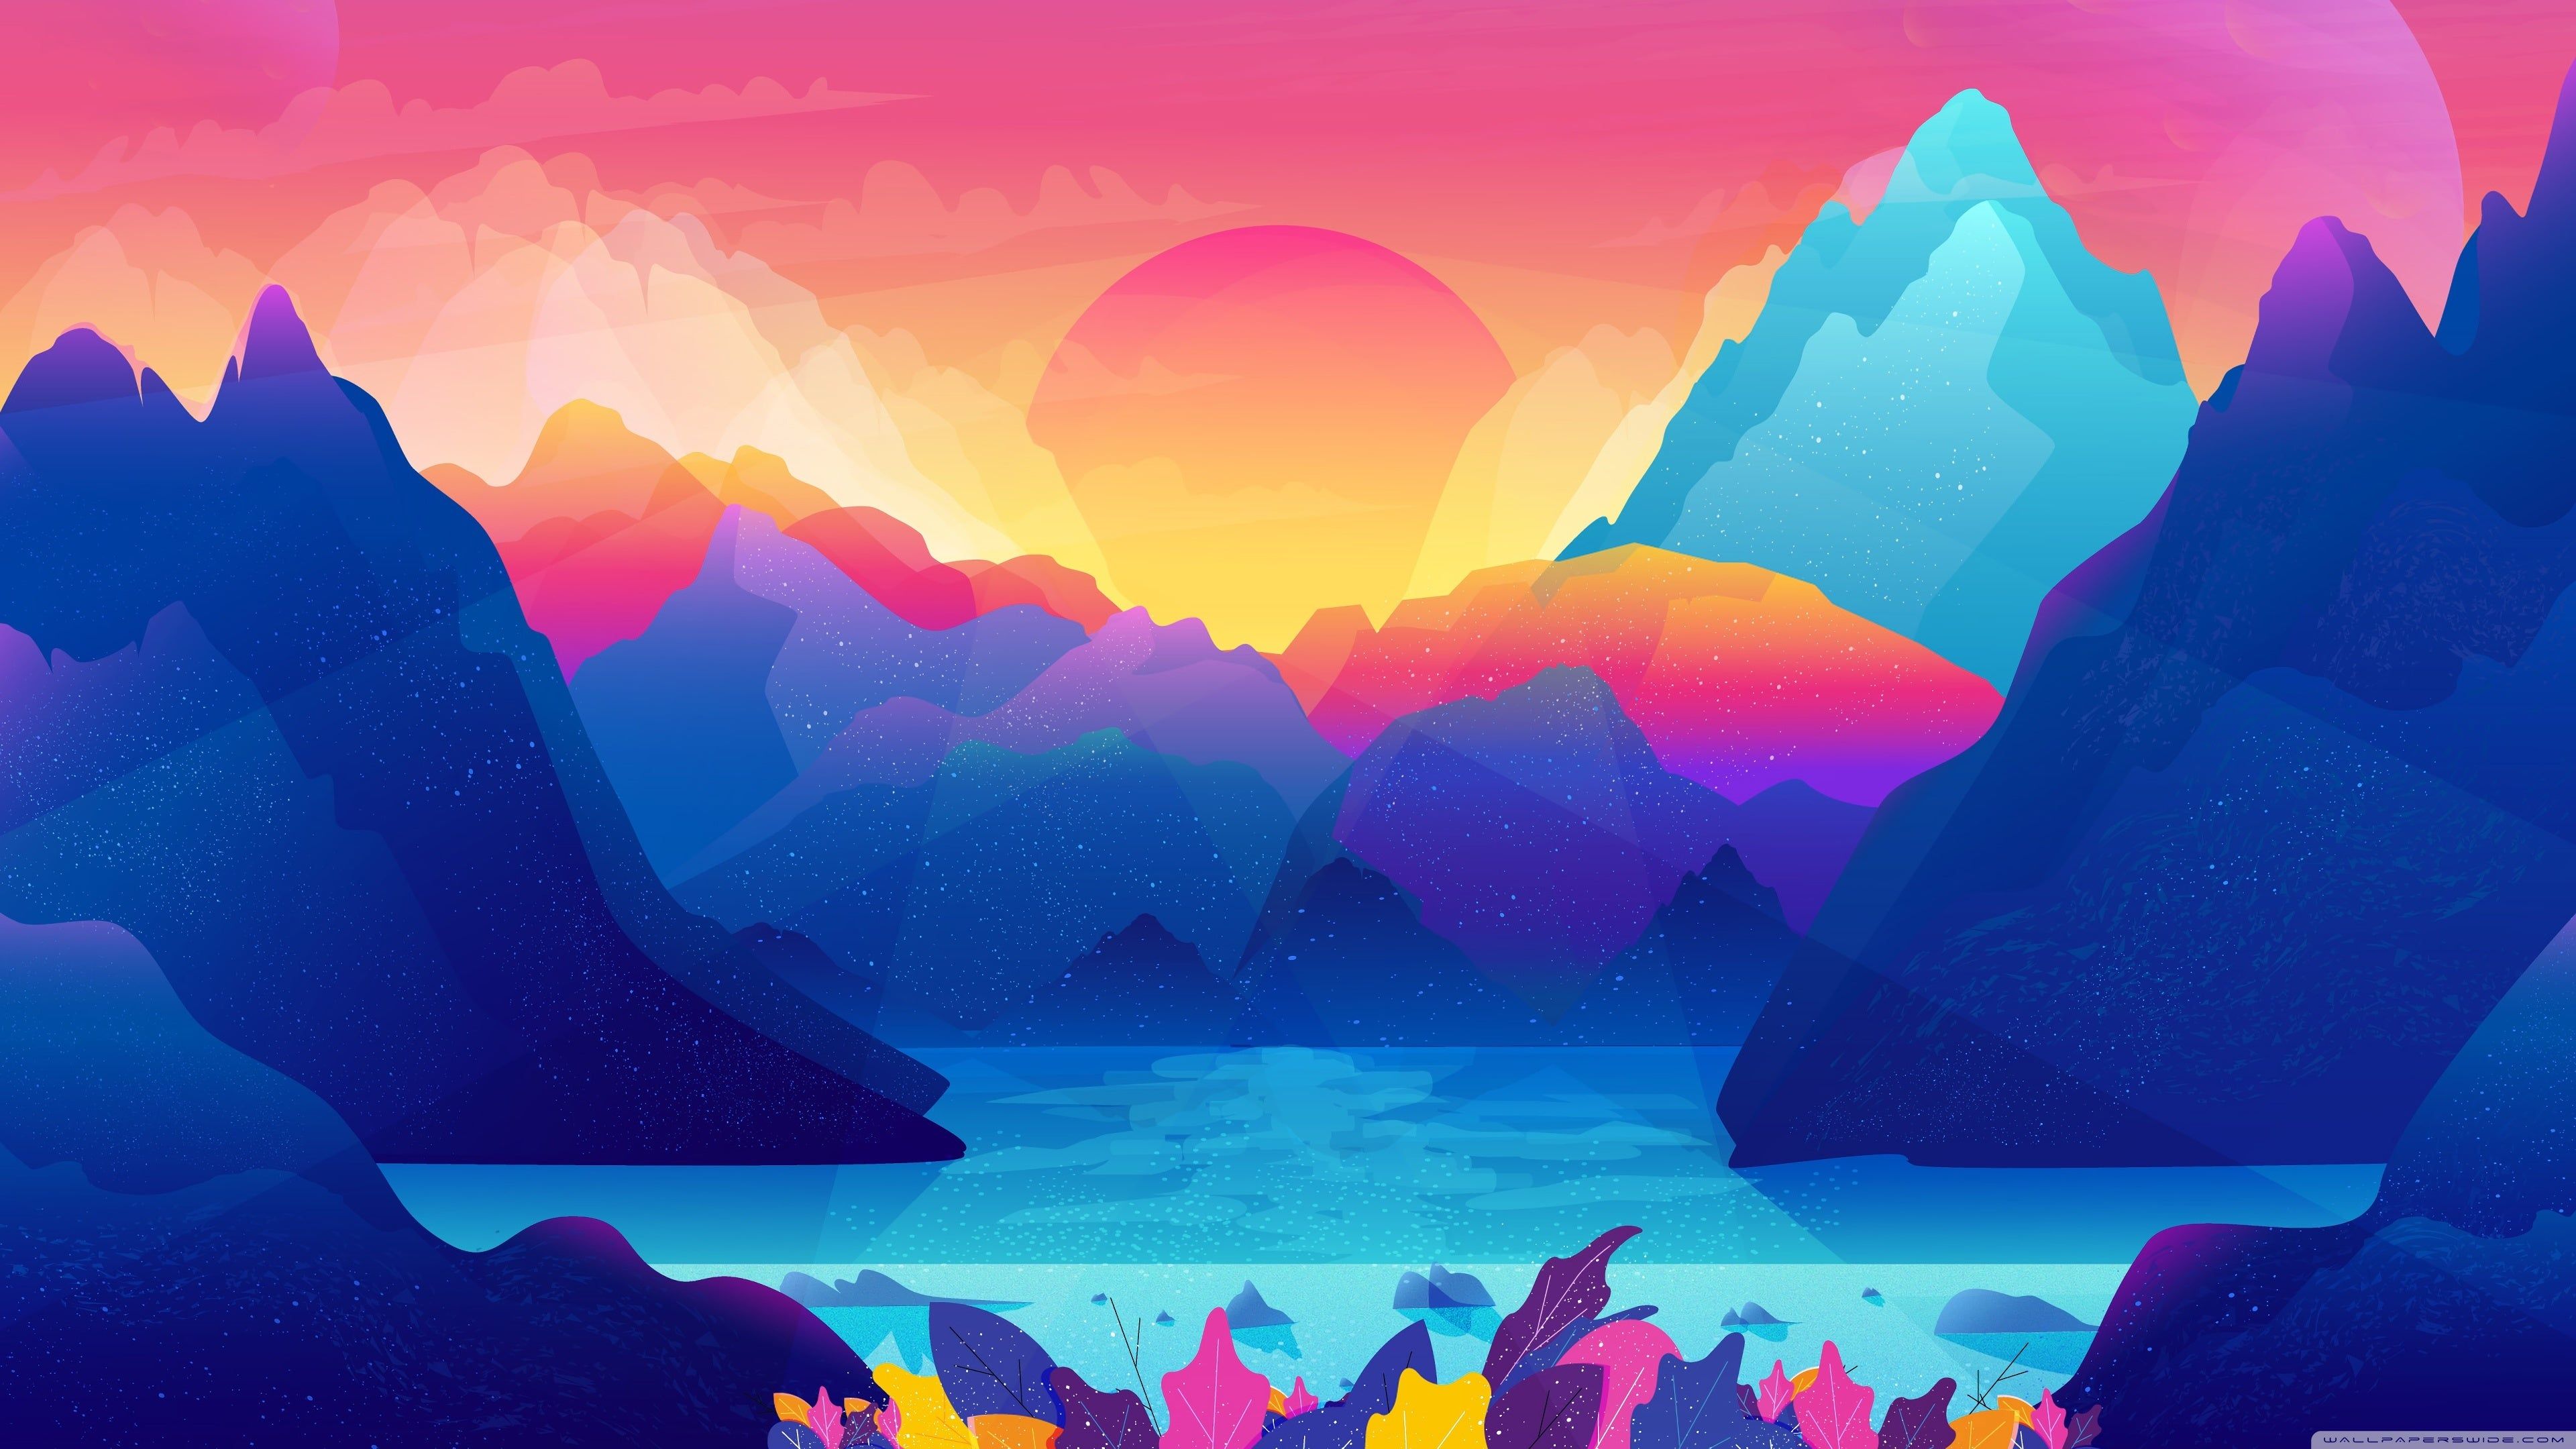 of Colorful 4K wallpaper for your desktop or mobile screen